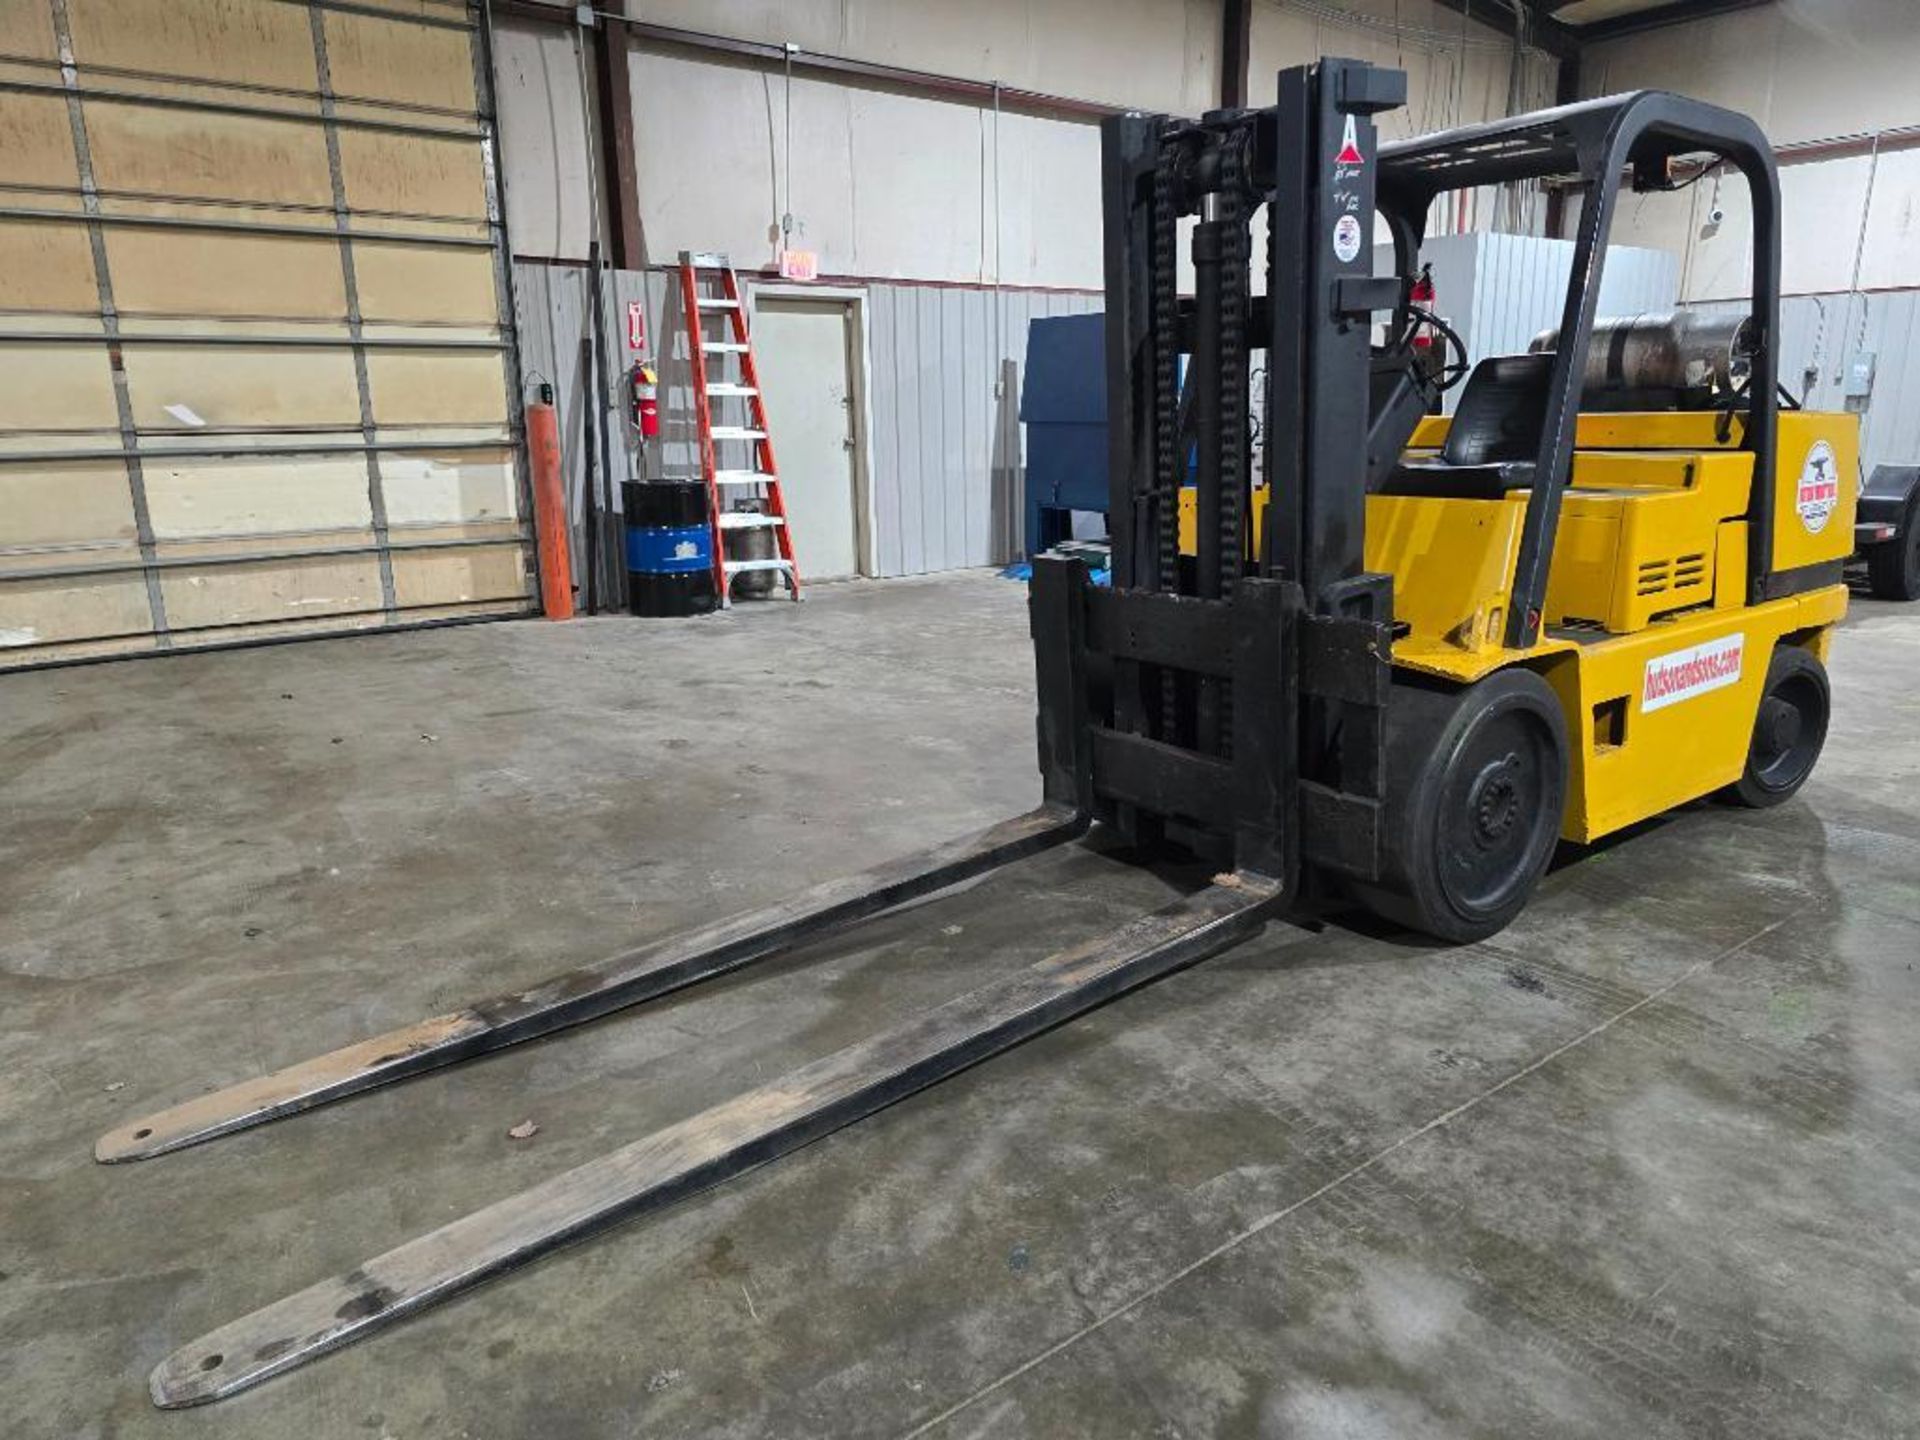 Caterpillar 12,500-LB. Capacity Forklift, Model T125D, LPG, Cushion Tires, 1,221 Hours, 2-Stage Mast - Image 2 of 12